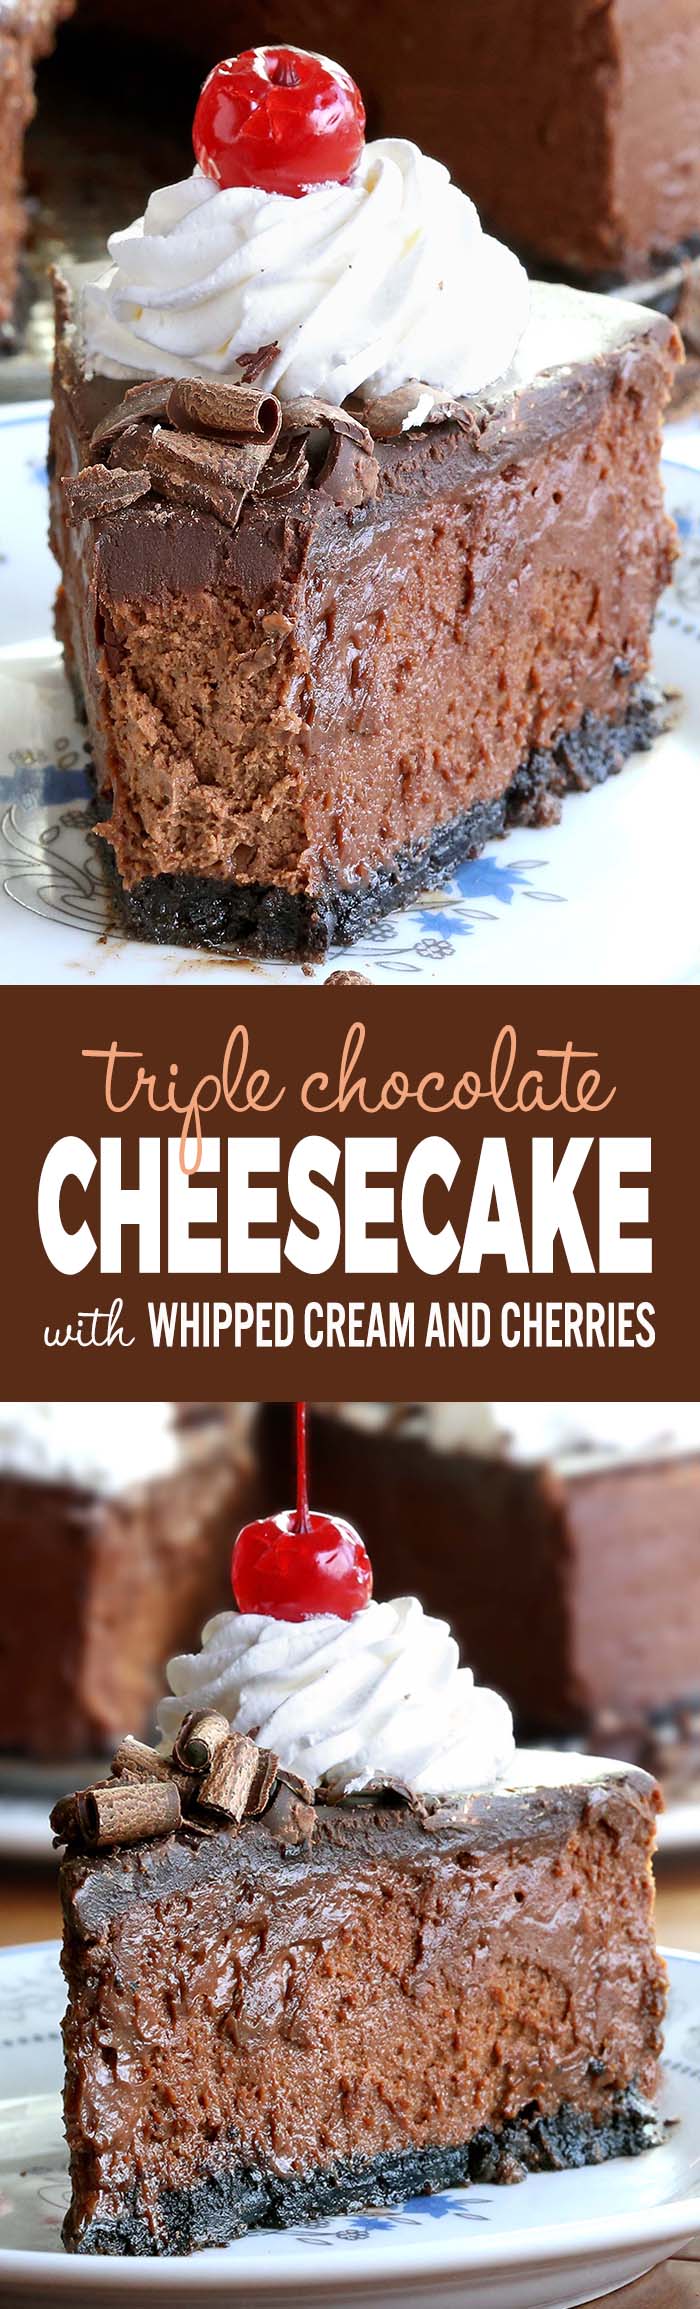 Smooth, rich, decadent, chocolatey CHOCOLATE! Triple Chocolate Cheesecake with whipped cream and cherries, is simply a dream come true for any chocolate lover….like me!